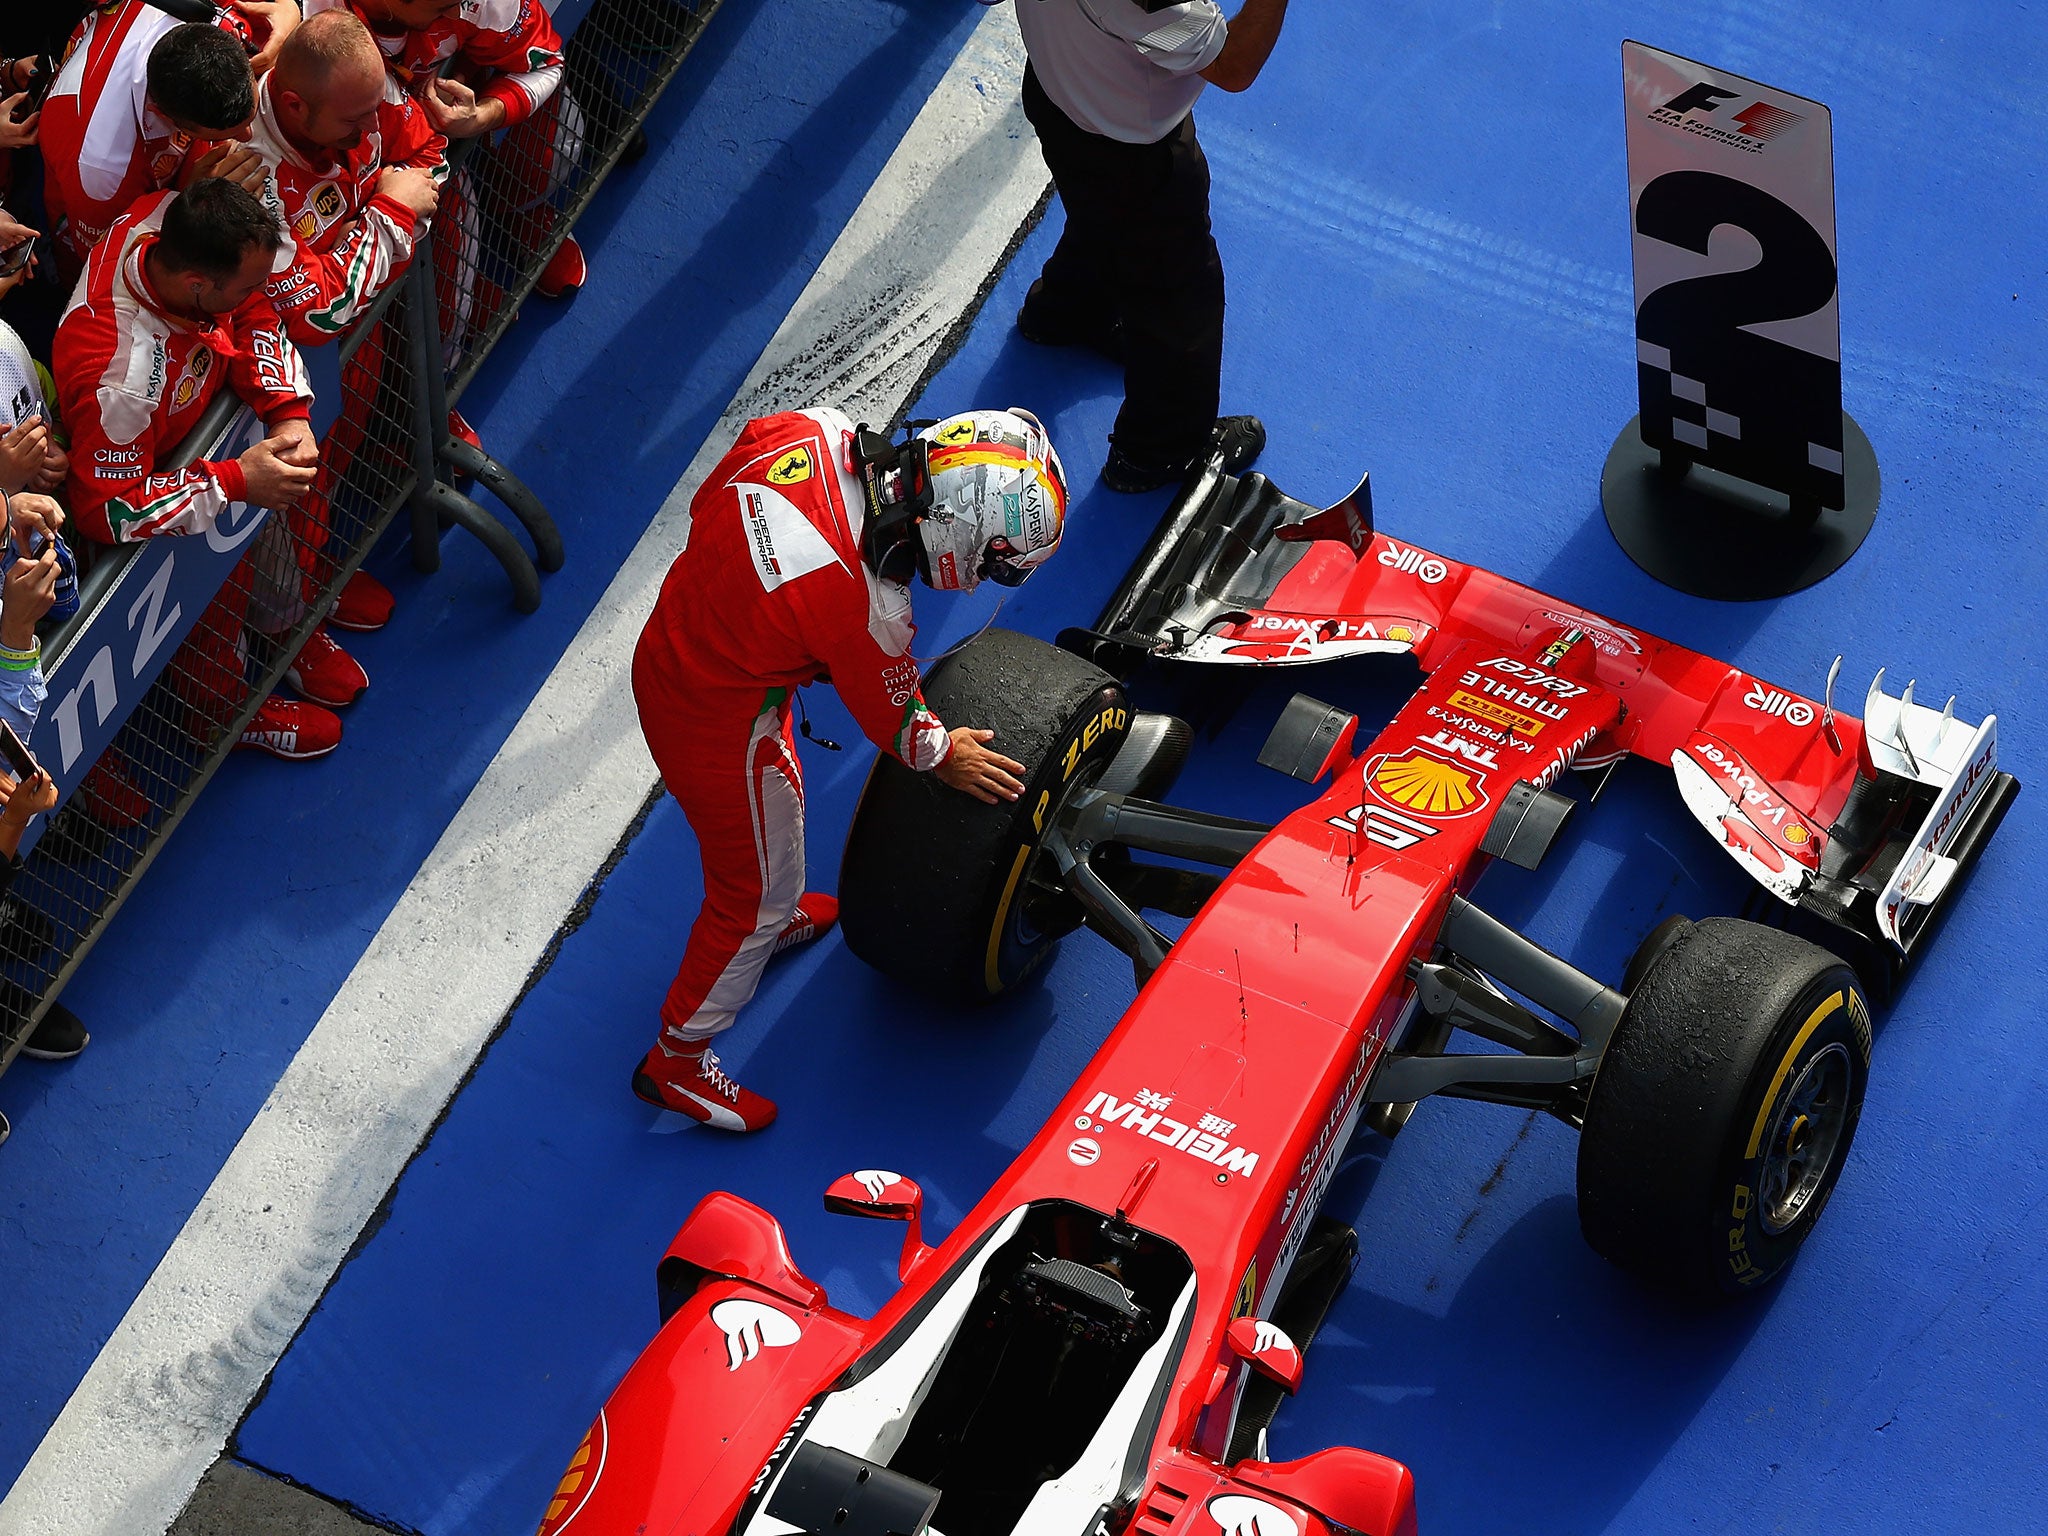 Sebastian Vettel after coming second in the Chinese Grand Prix (Getty)